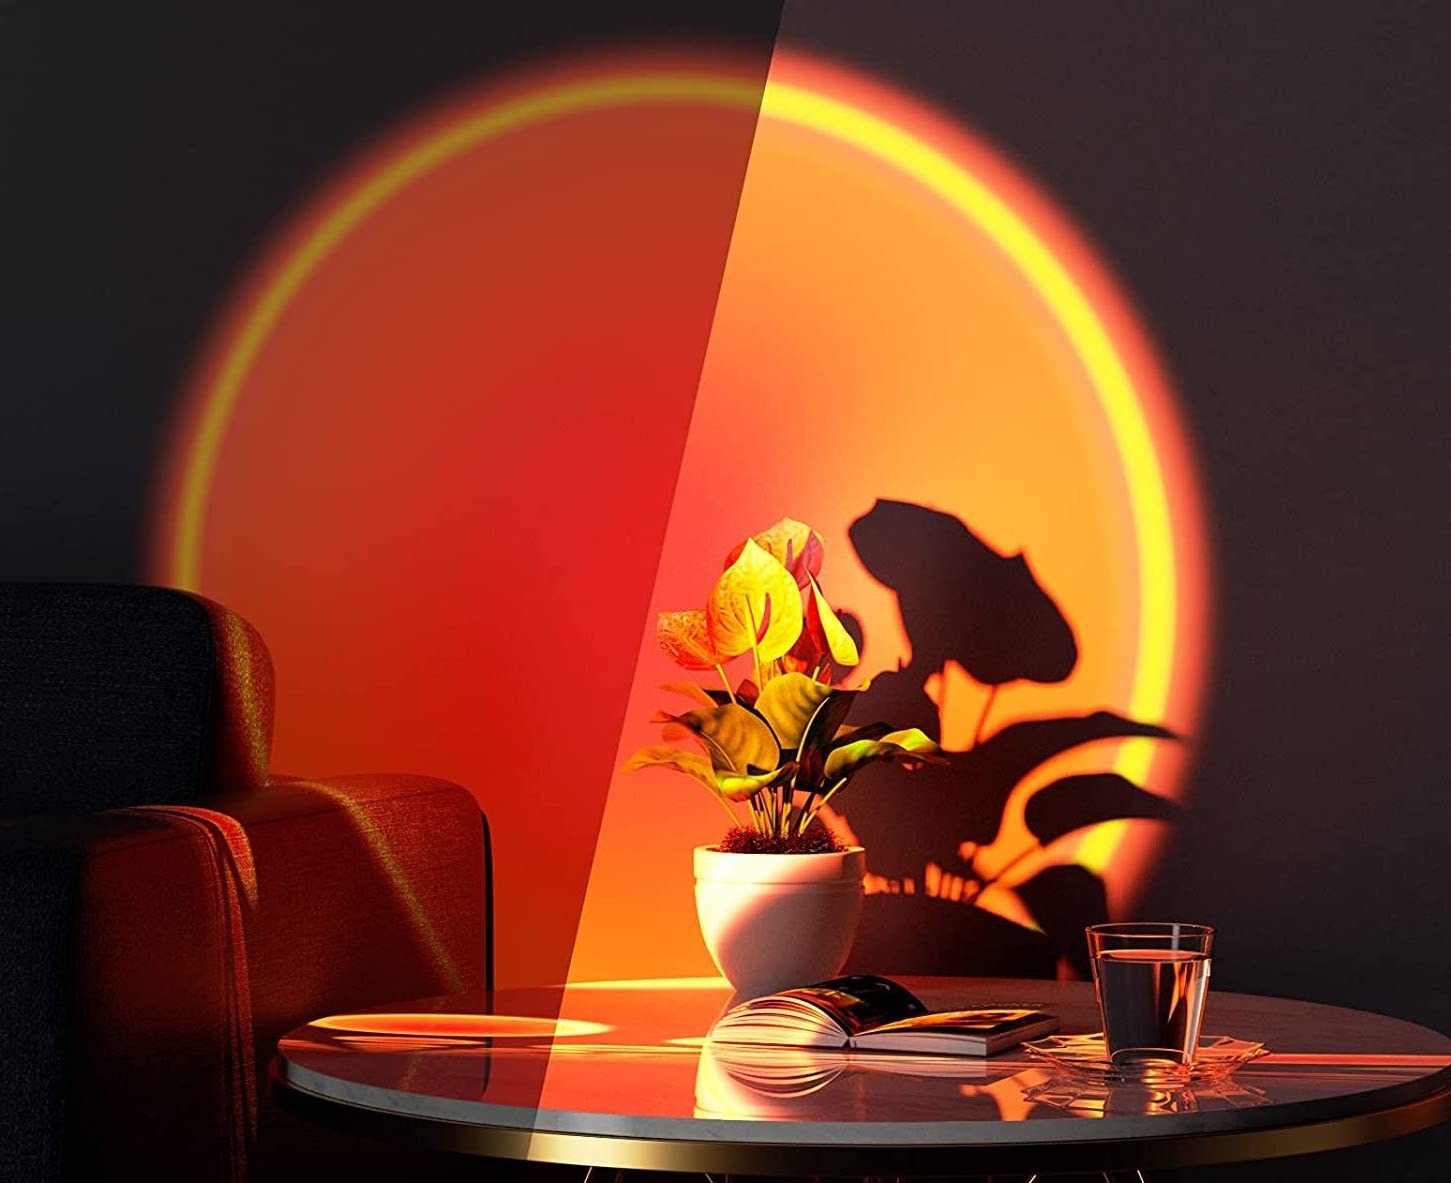 lamp projecting orange light onto wall behind coffee table and plant